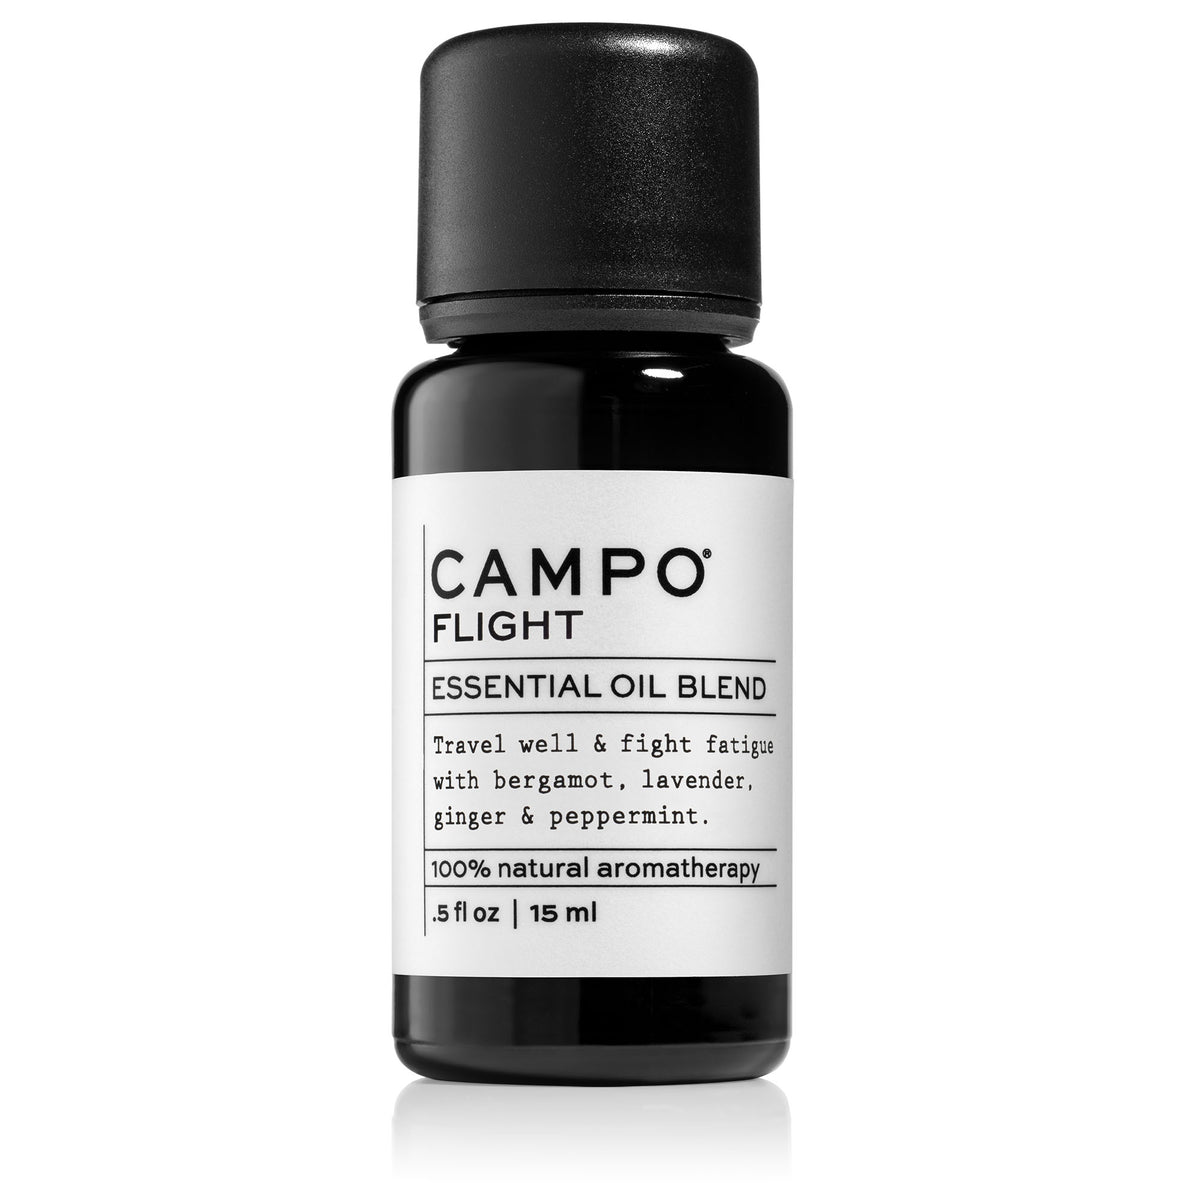 Campo Beauty FLIGHT Blend 15 ml Essential Oil. Dispels feelings of stress during flight and restores a sense of vitality and alertness in any time zone. Feel grounded and connected to your mind and body with this 100% pure essential oil roll-on blend of Bergamot, Lavender, Peppermint &amp; Ginger.